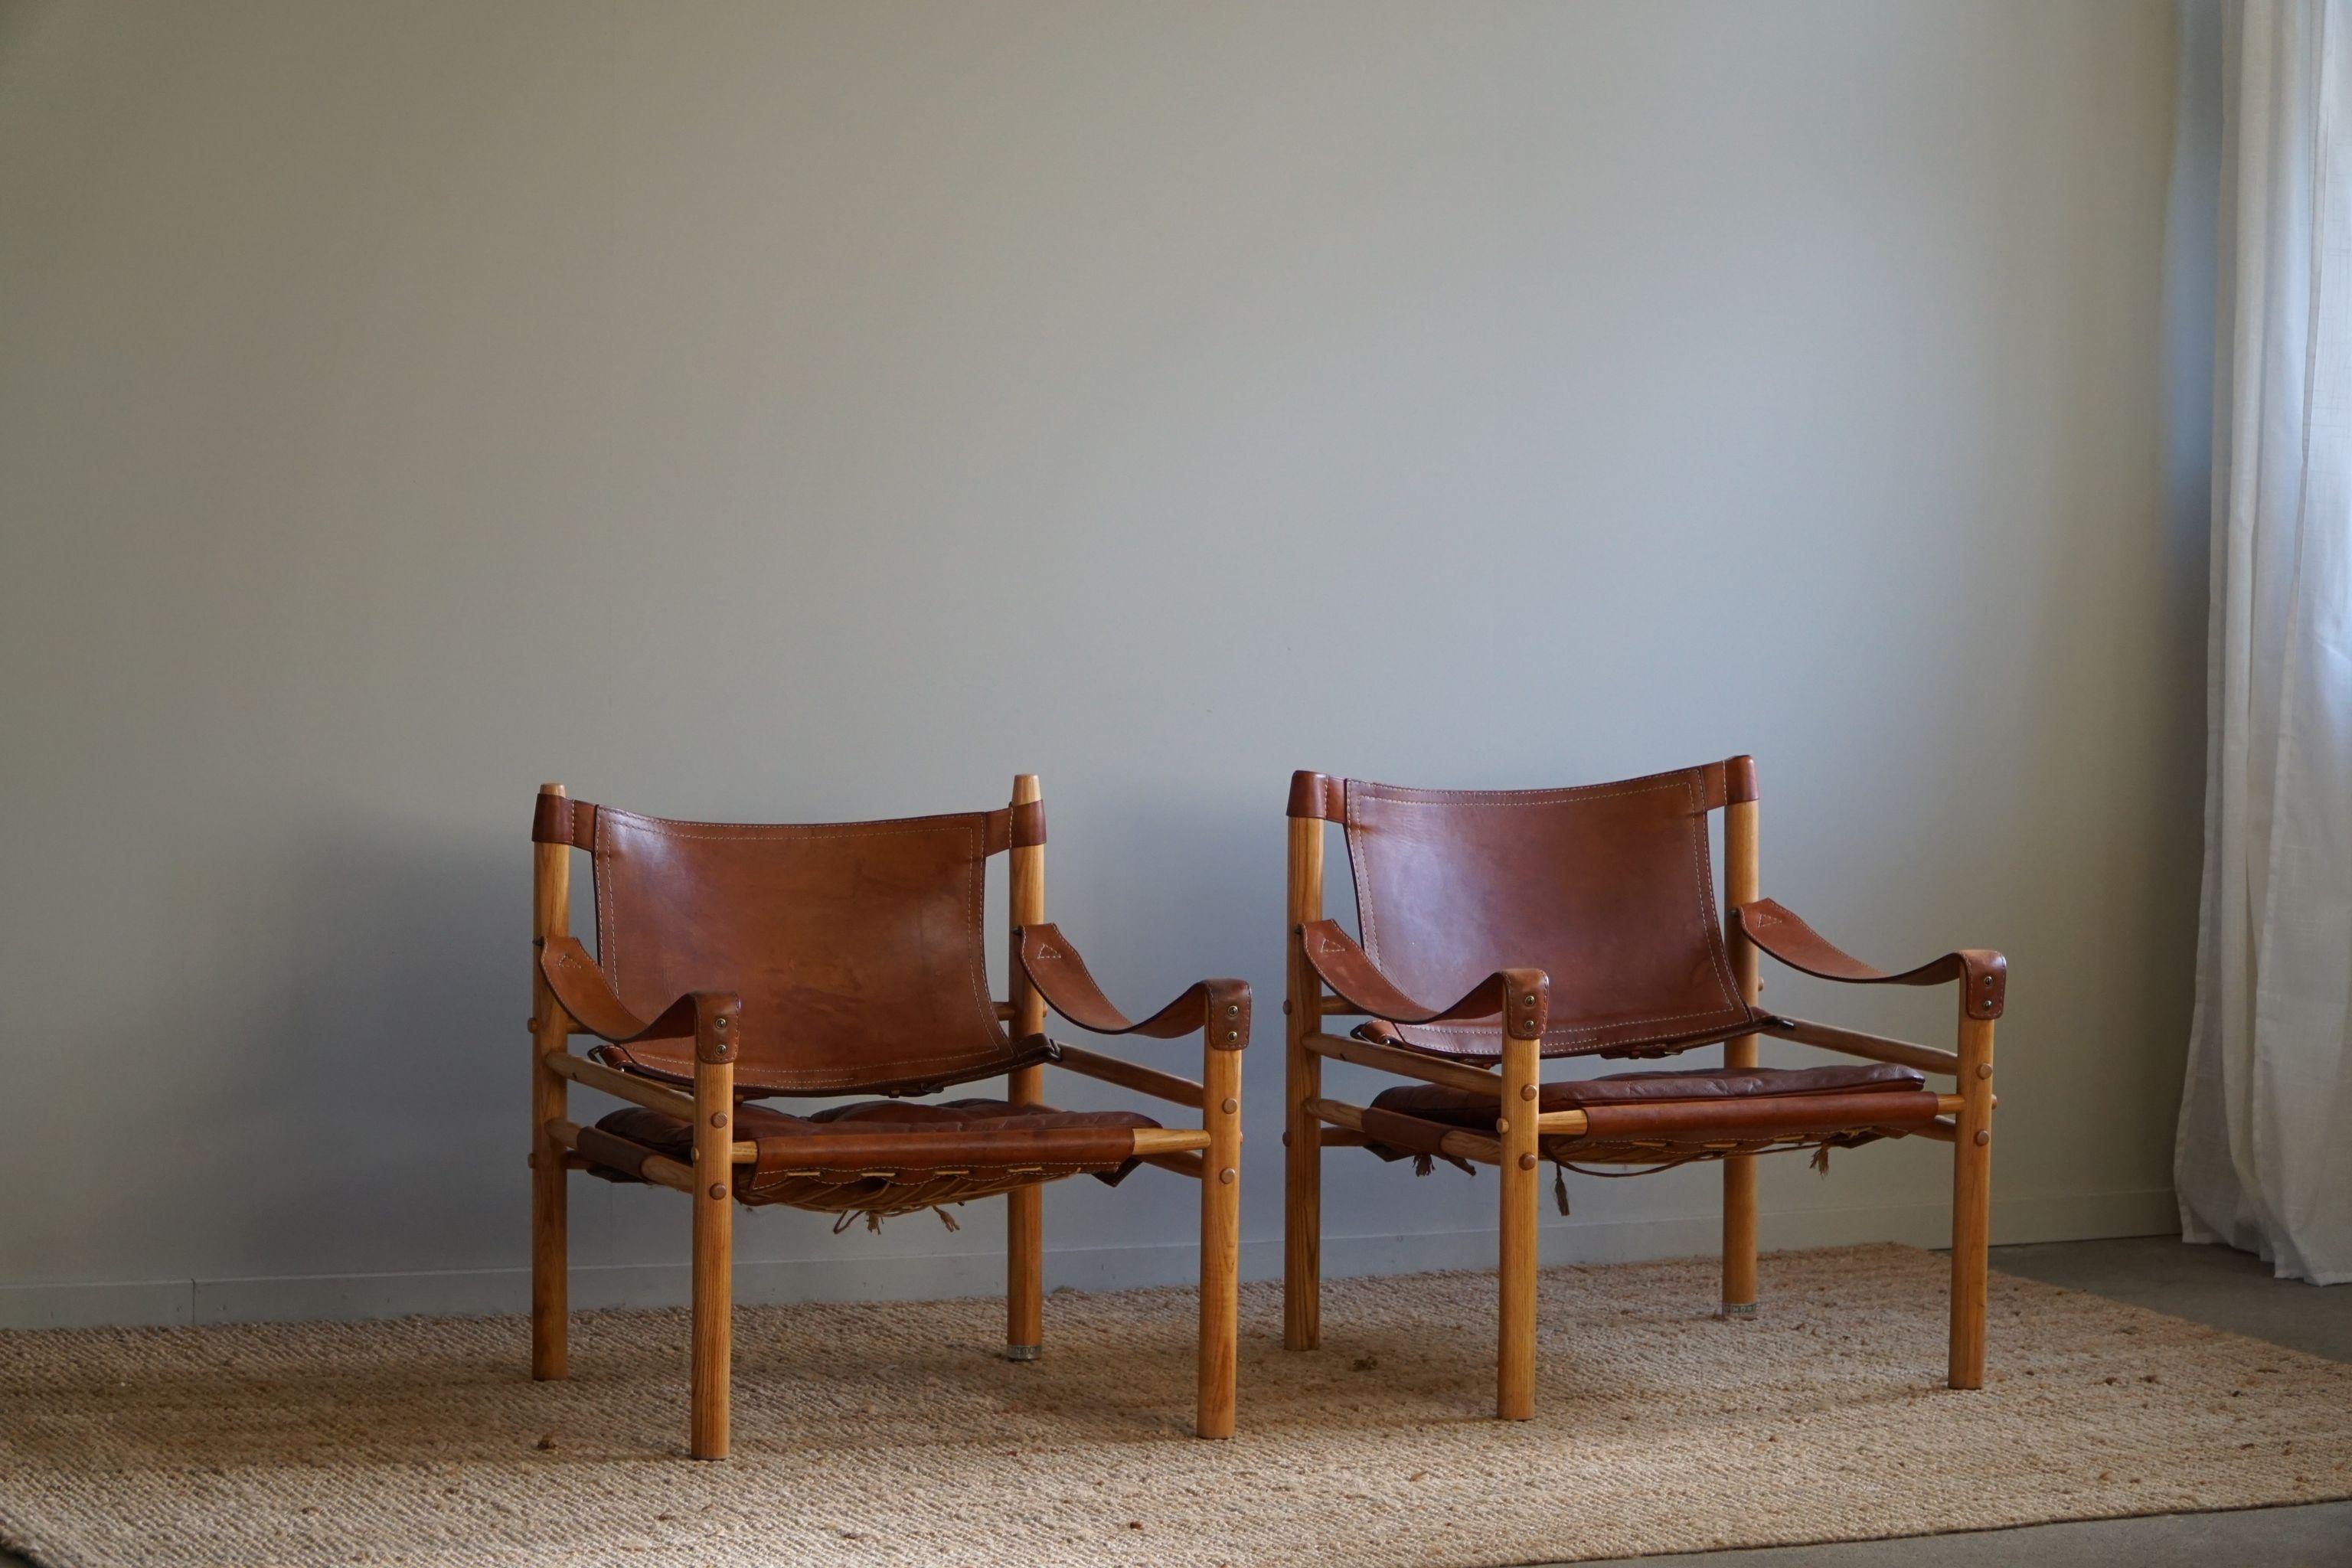 Beautiful pair of safari chairs in a warm red/brown leather and wooden ash frame. 
Designed by Arne Norell, produced by Arne Norell AB in Aneby, Sweden, in the 1960s.
This set is in a good vintage condition.

These appealing armchairs will fit into